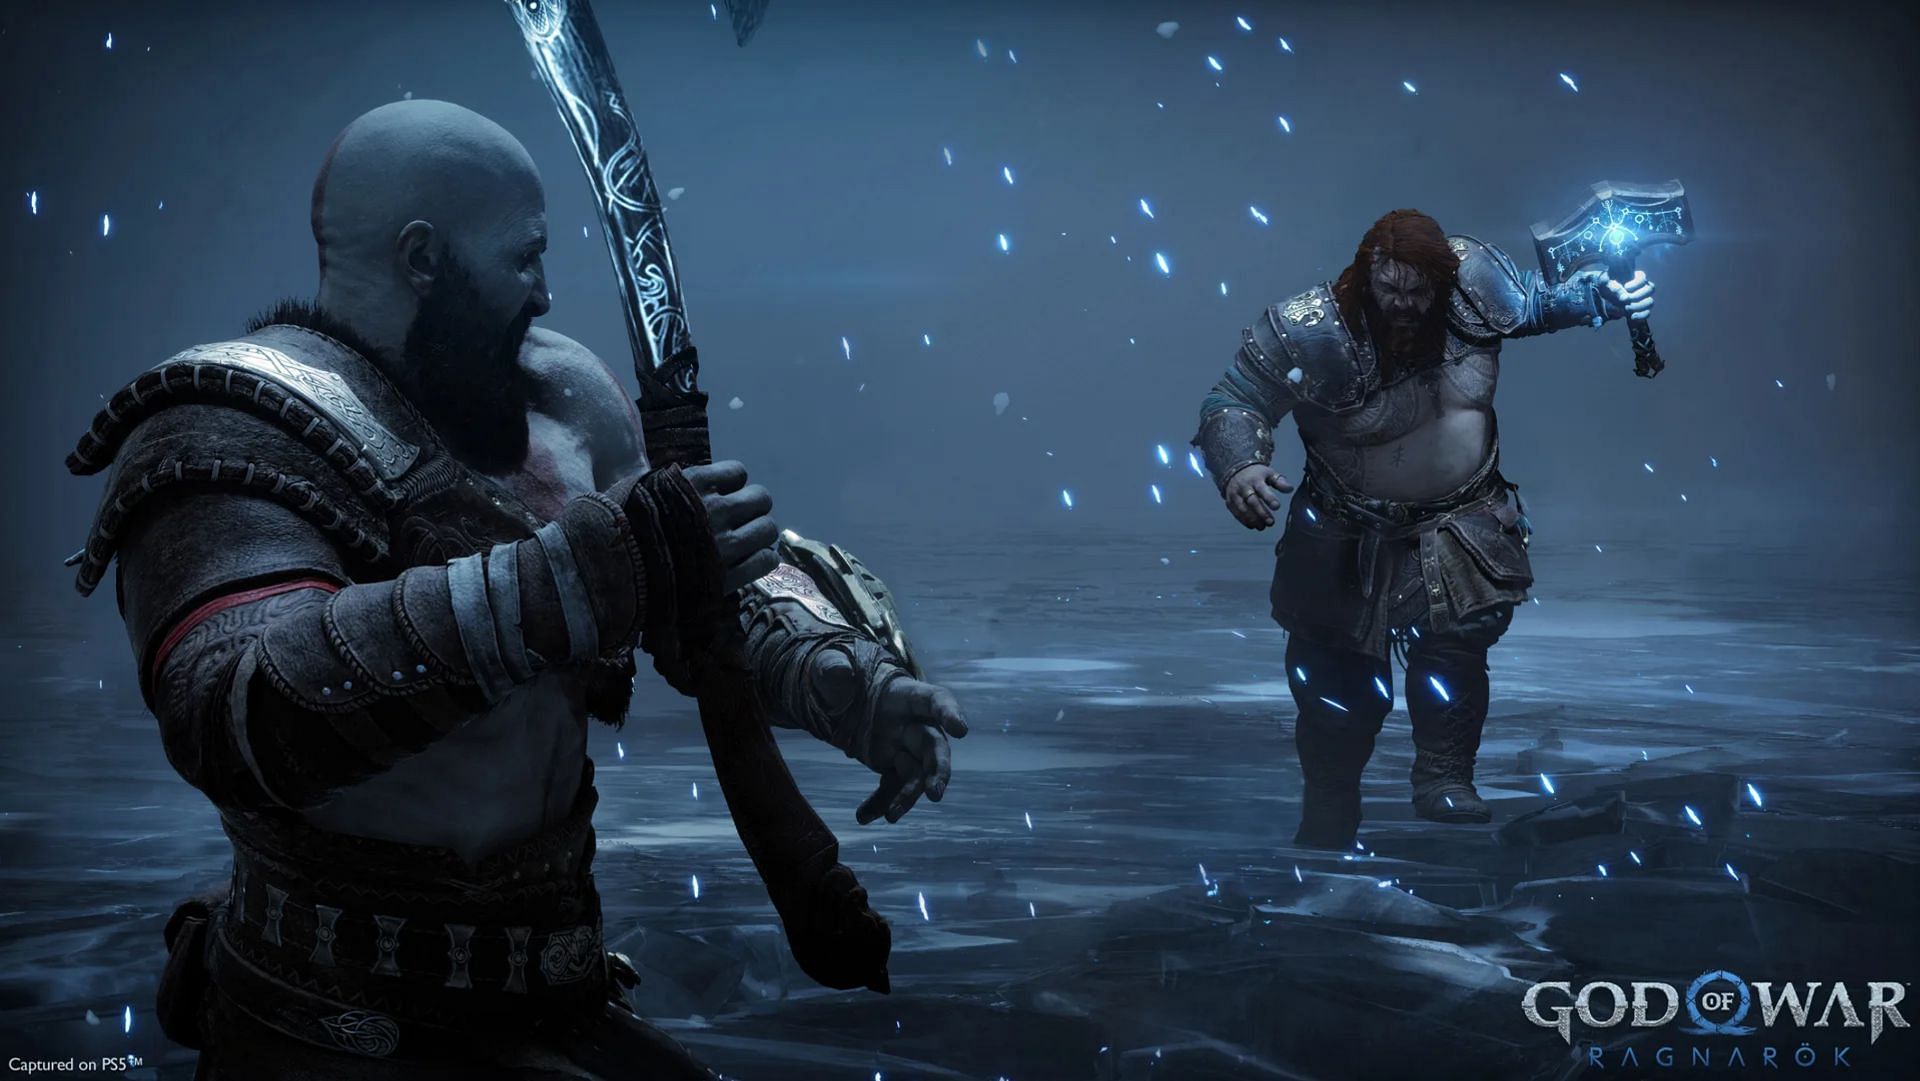 The battle between Kratos and Thor is one of the most hyped moments in God of War Ragnarok, which has fans eagerly awaiting the game